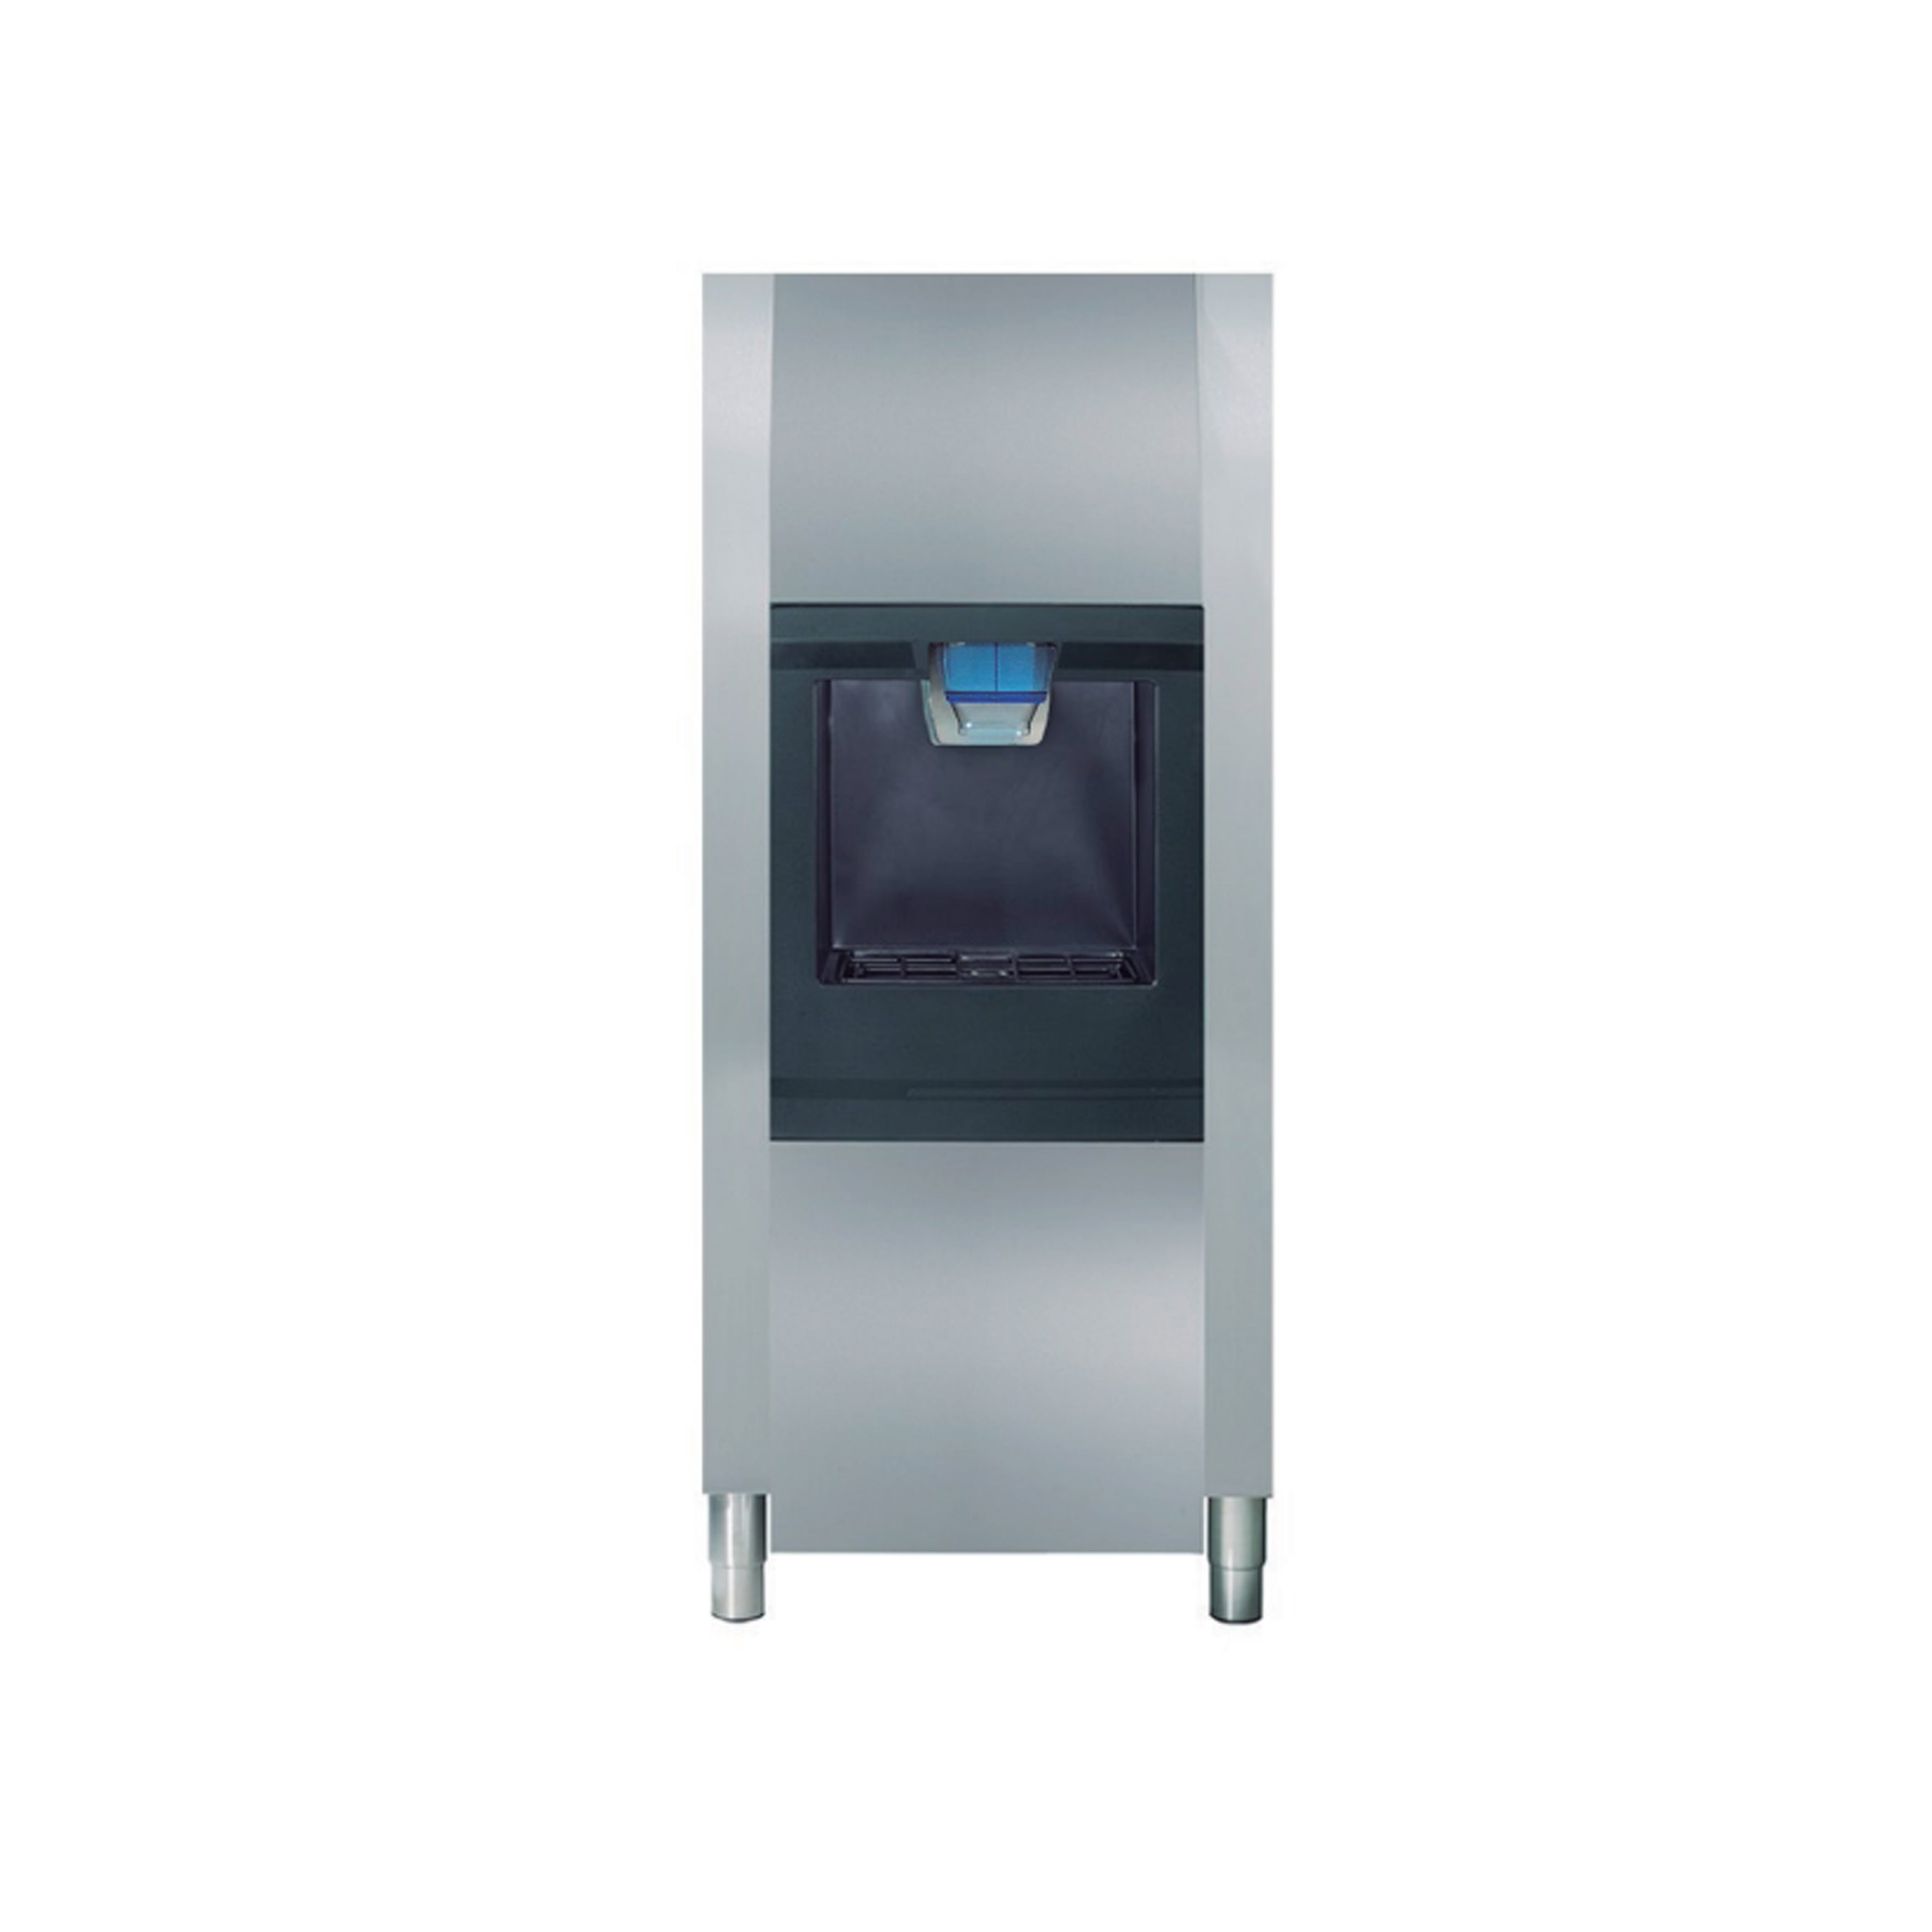 commercial-ice-maker-commercial-ice-machine-commercial-kitchen-equipment-chef-aaa